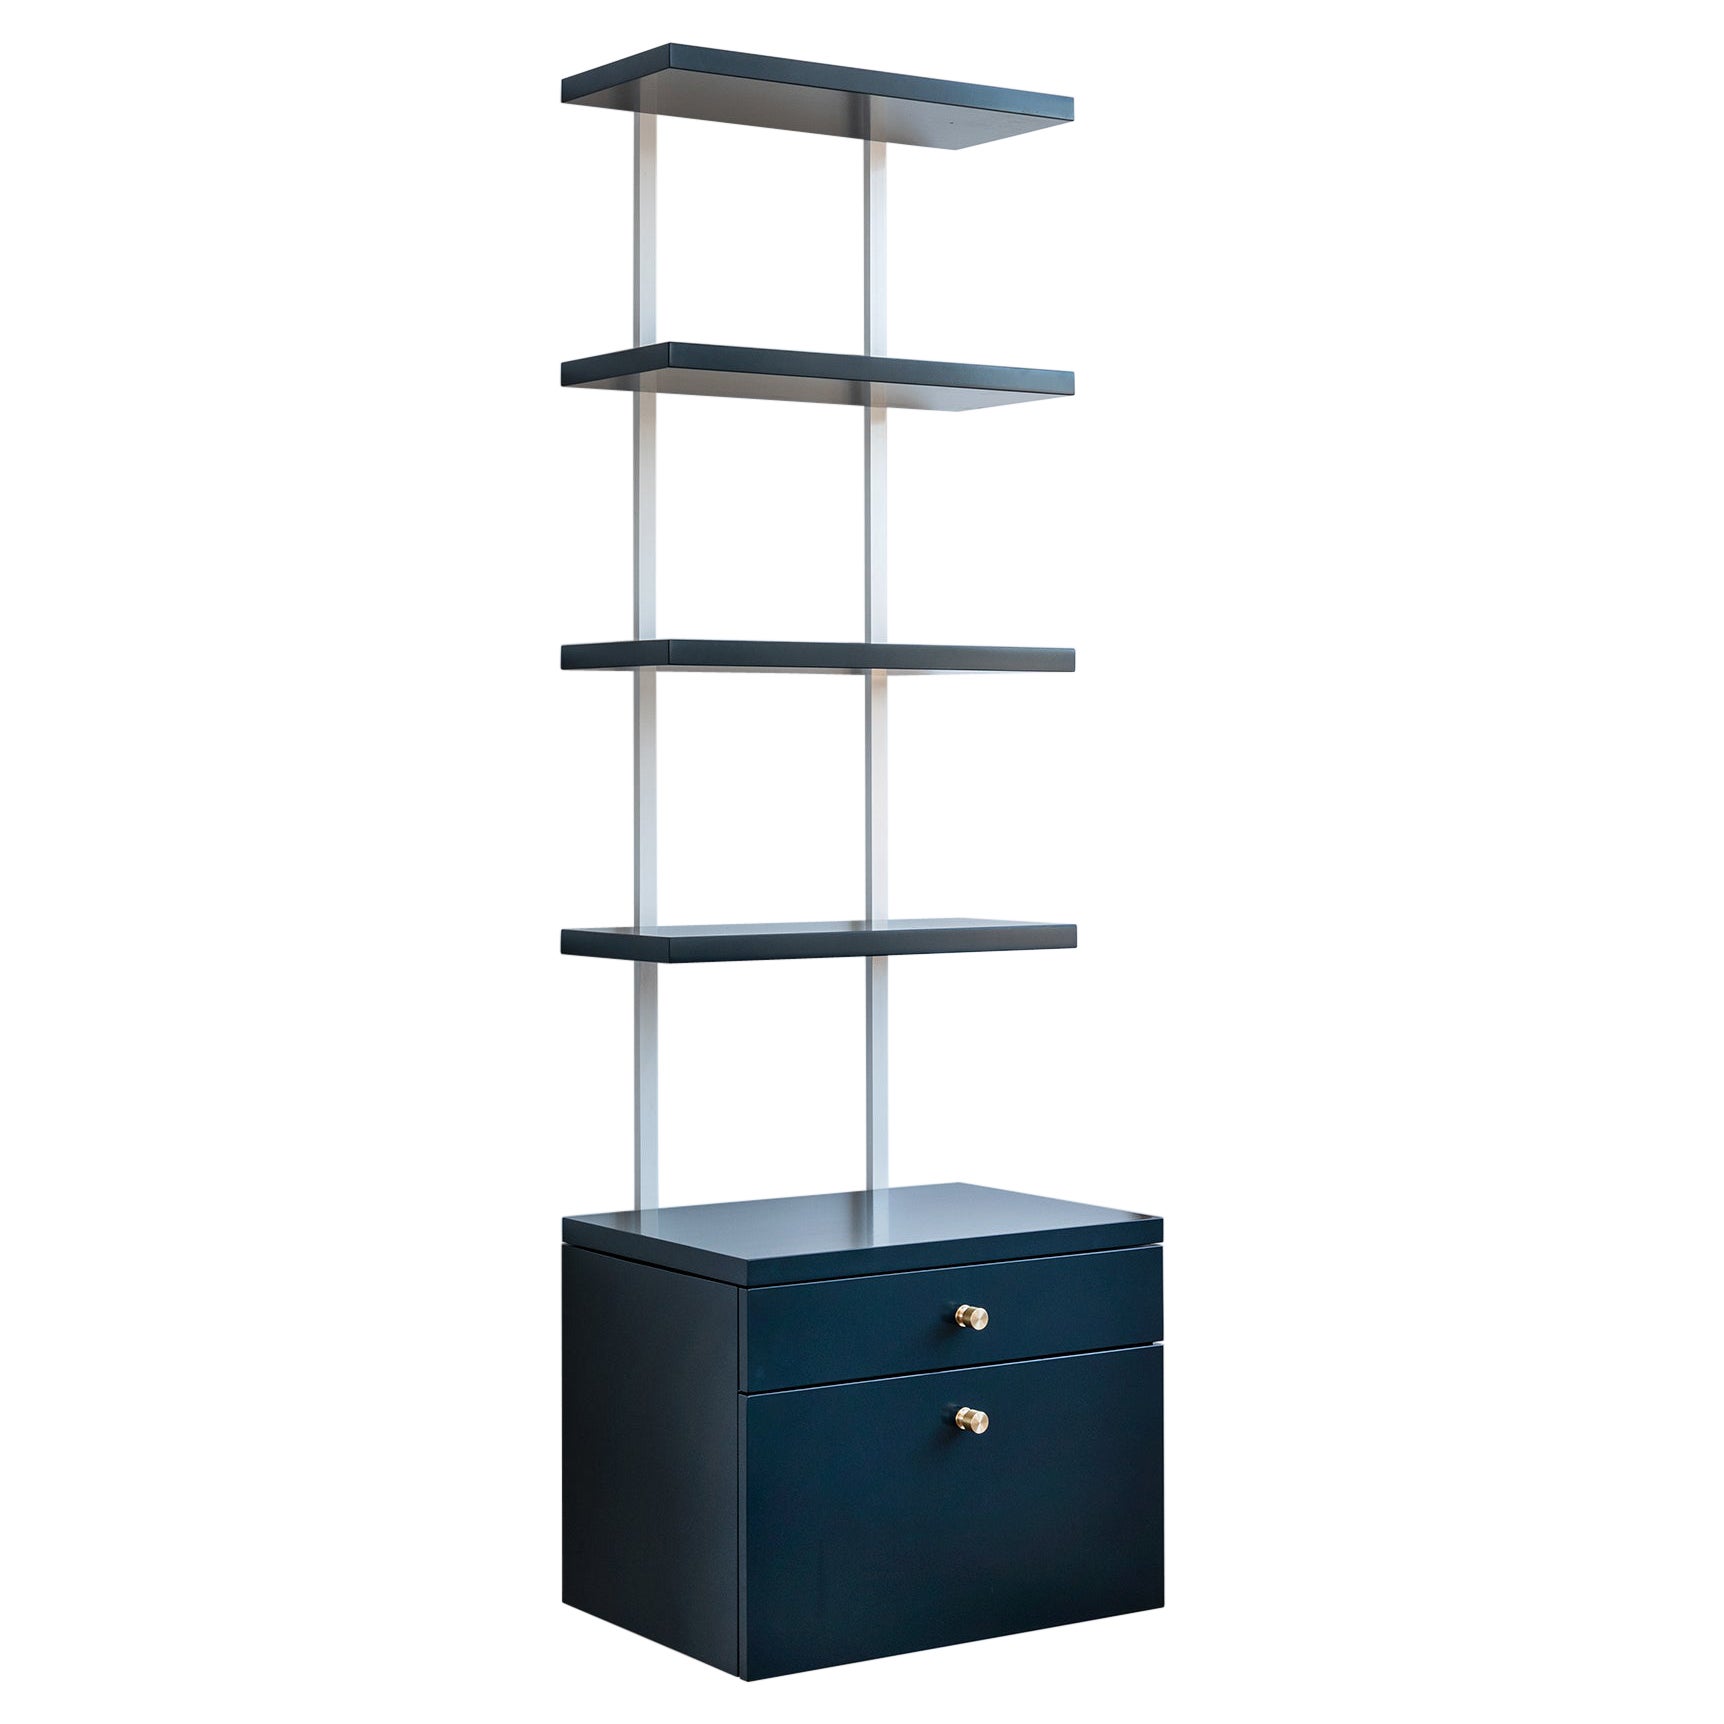 AS6 wall unit 24" wide shelves & drawer cabinet in Hague blue lacquer